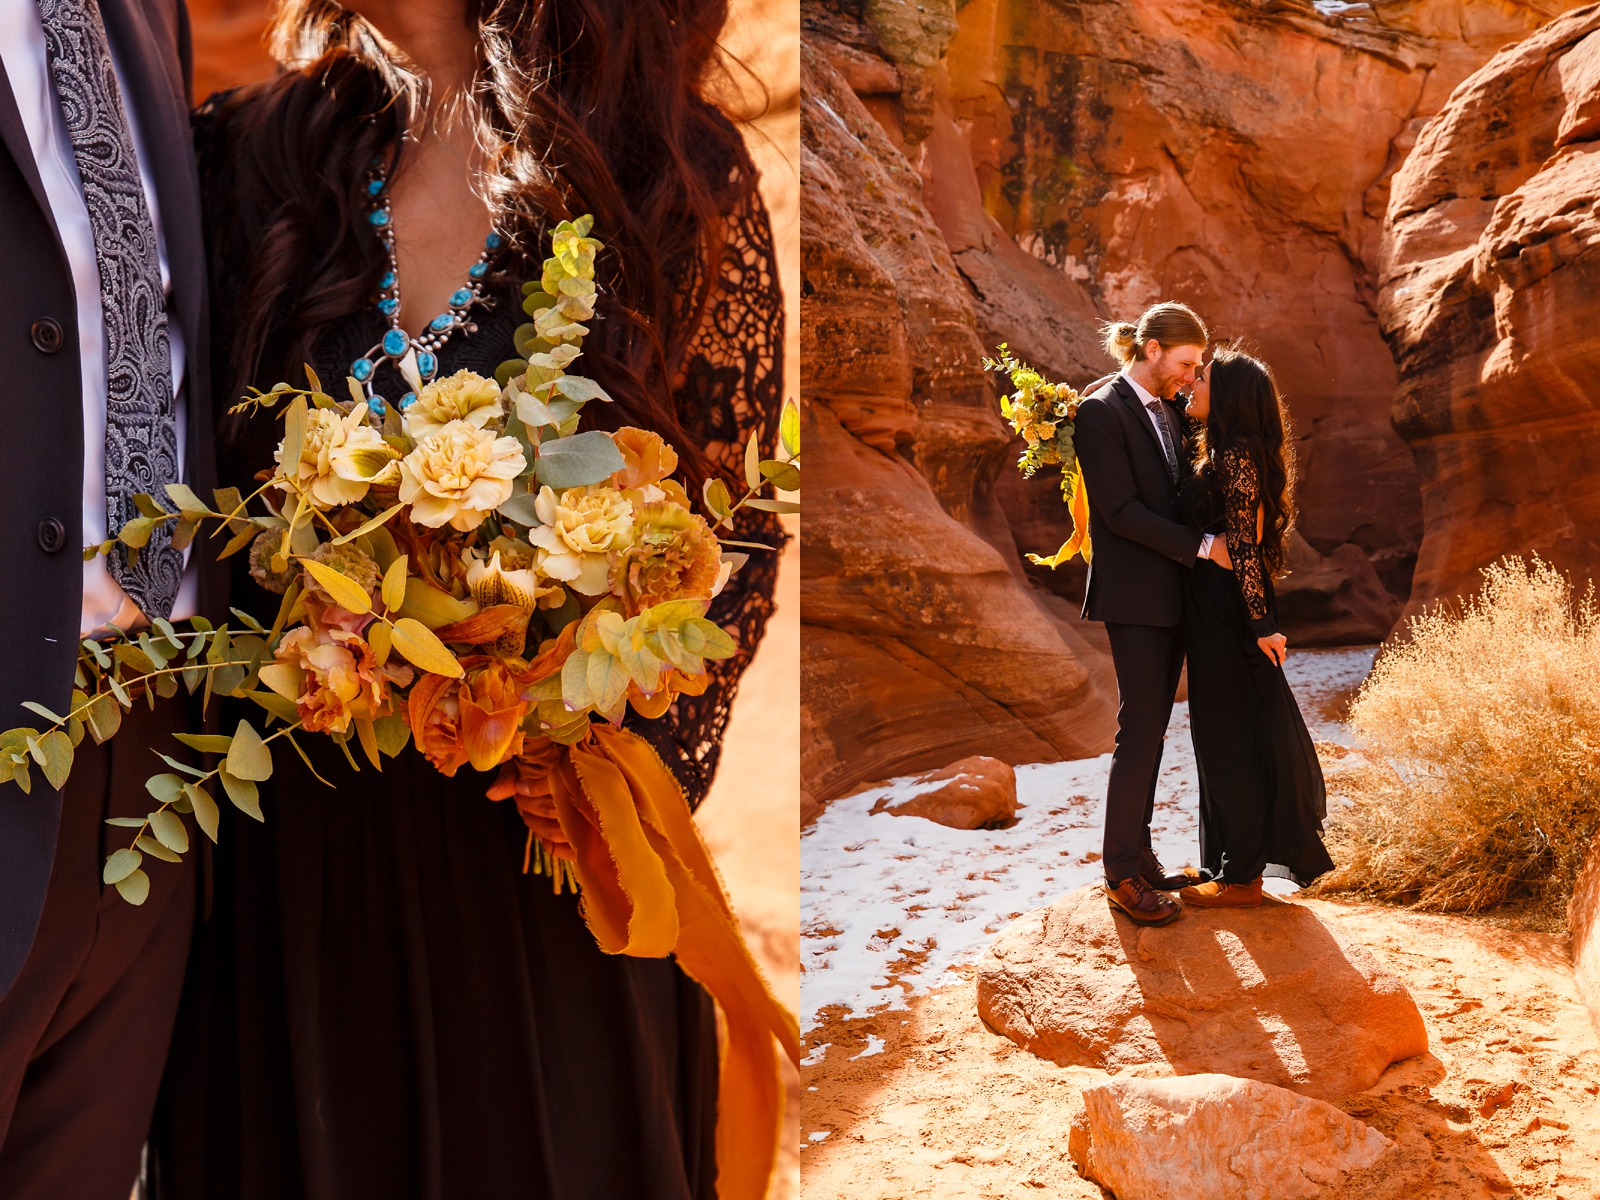 Couple cuddling and showing off boho bouquet in a slot canyon.